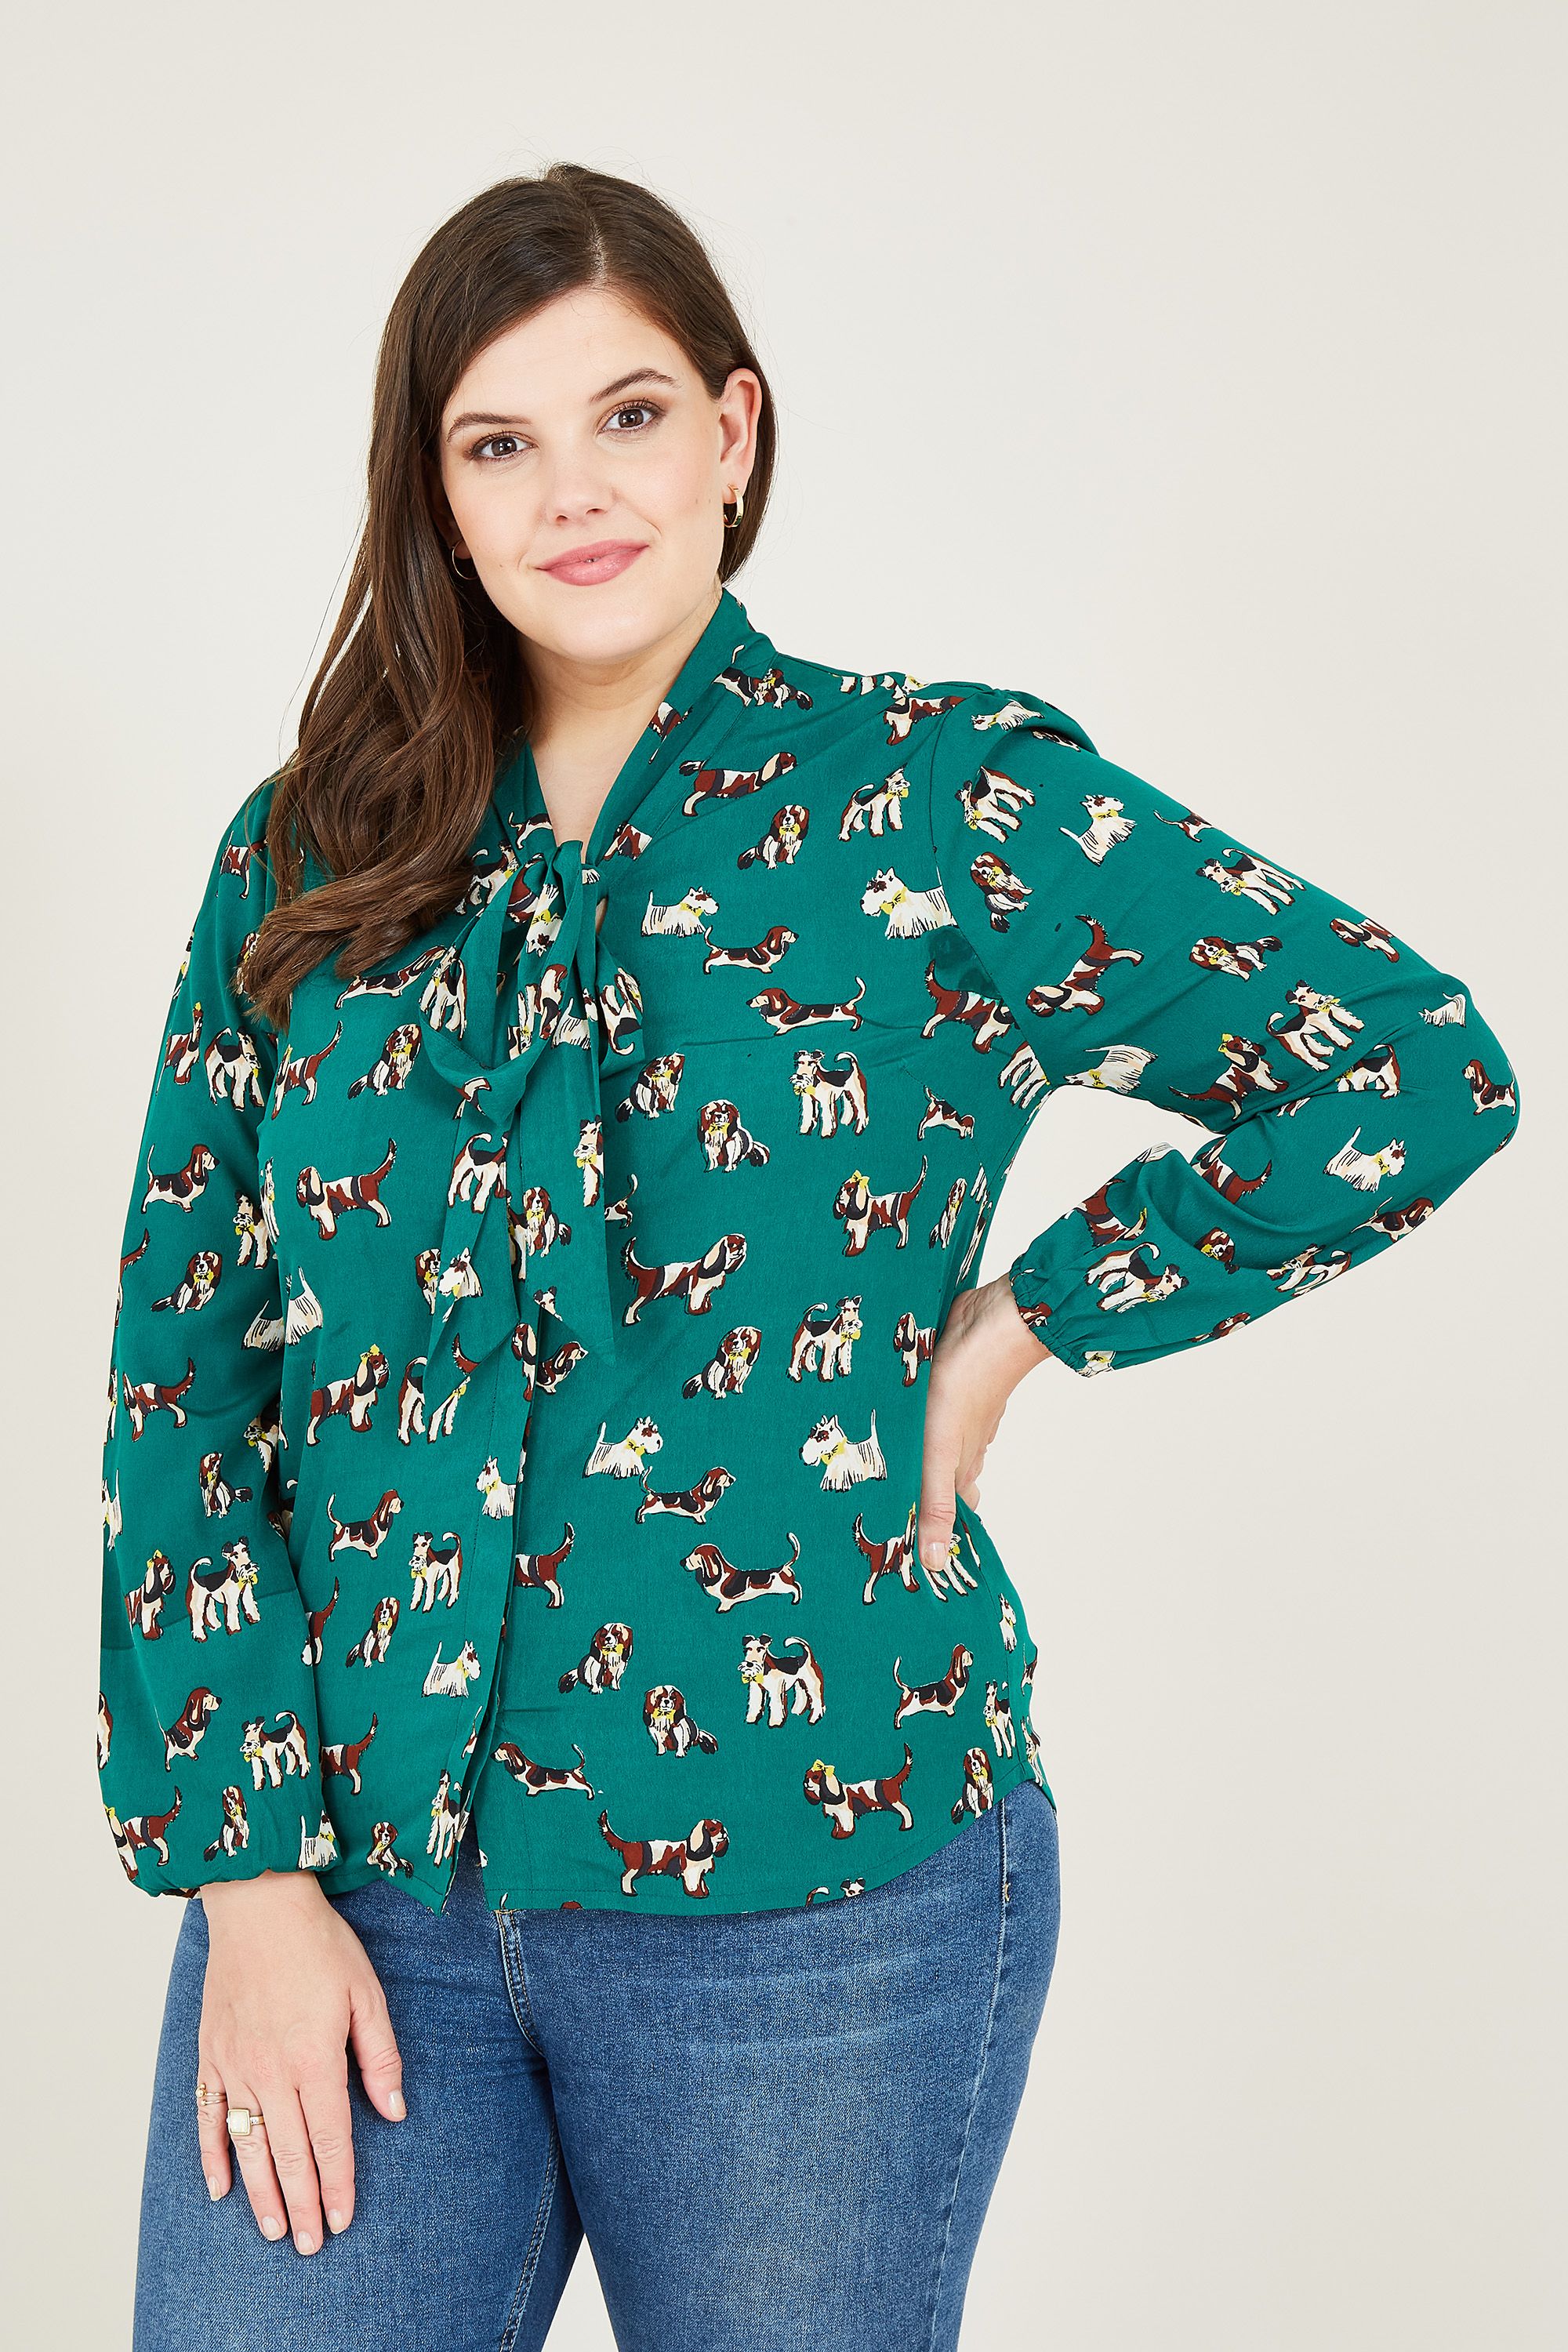 At Yumi, we love a fun print. That's why we've created our Plus Size Dog Pussy Bow Blouse. Skilfully made from light fabric, it comes with classically long sleeves and a fun tie neckline. Finished with a soft-touch feel, it's perfect for teaming with your pair of jeans.